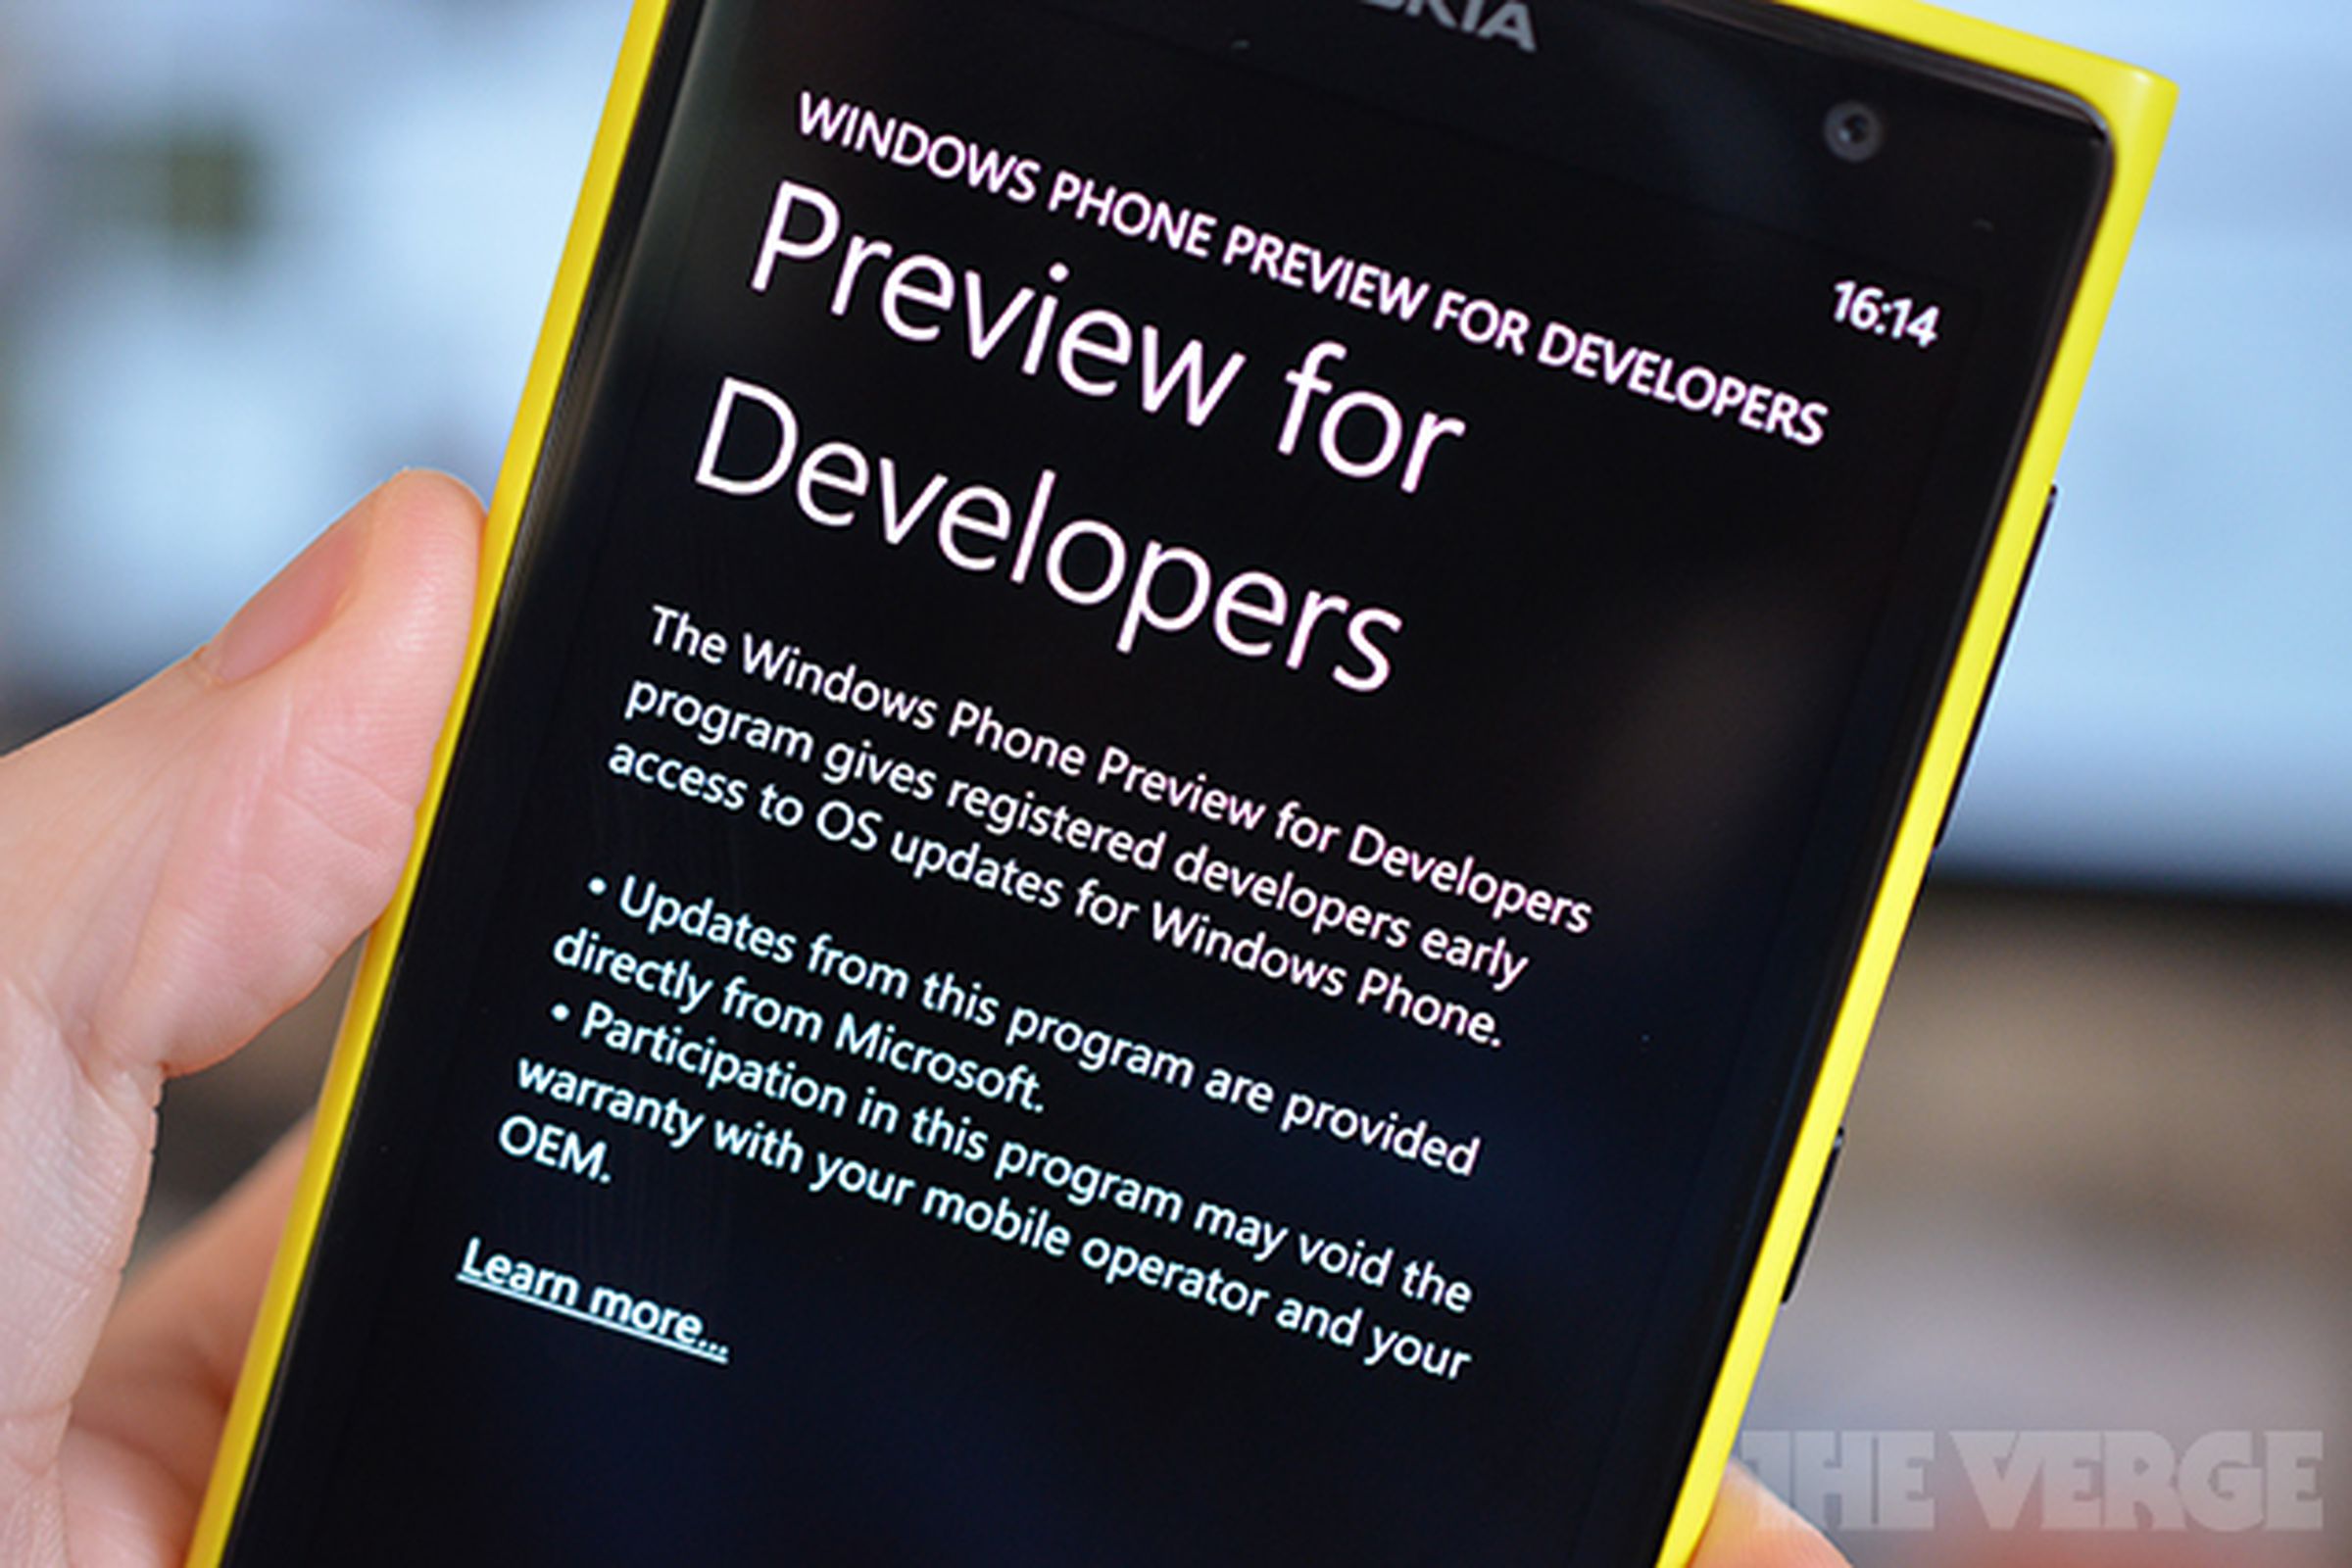 Windows Phone preview